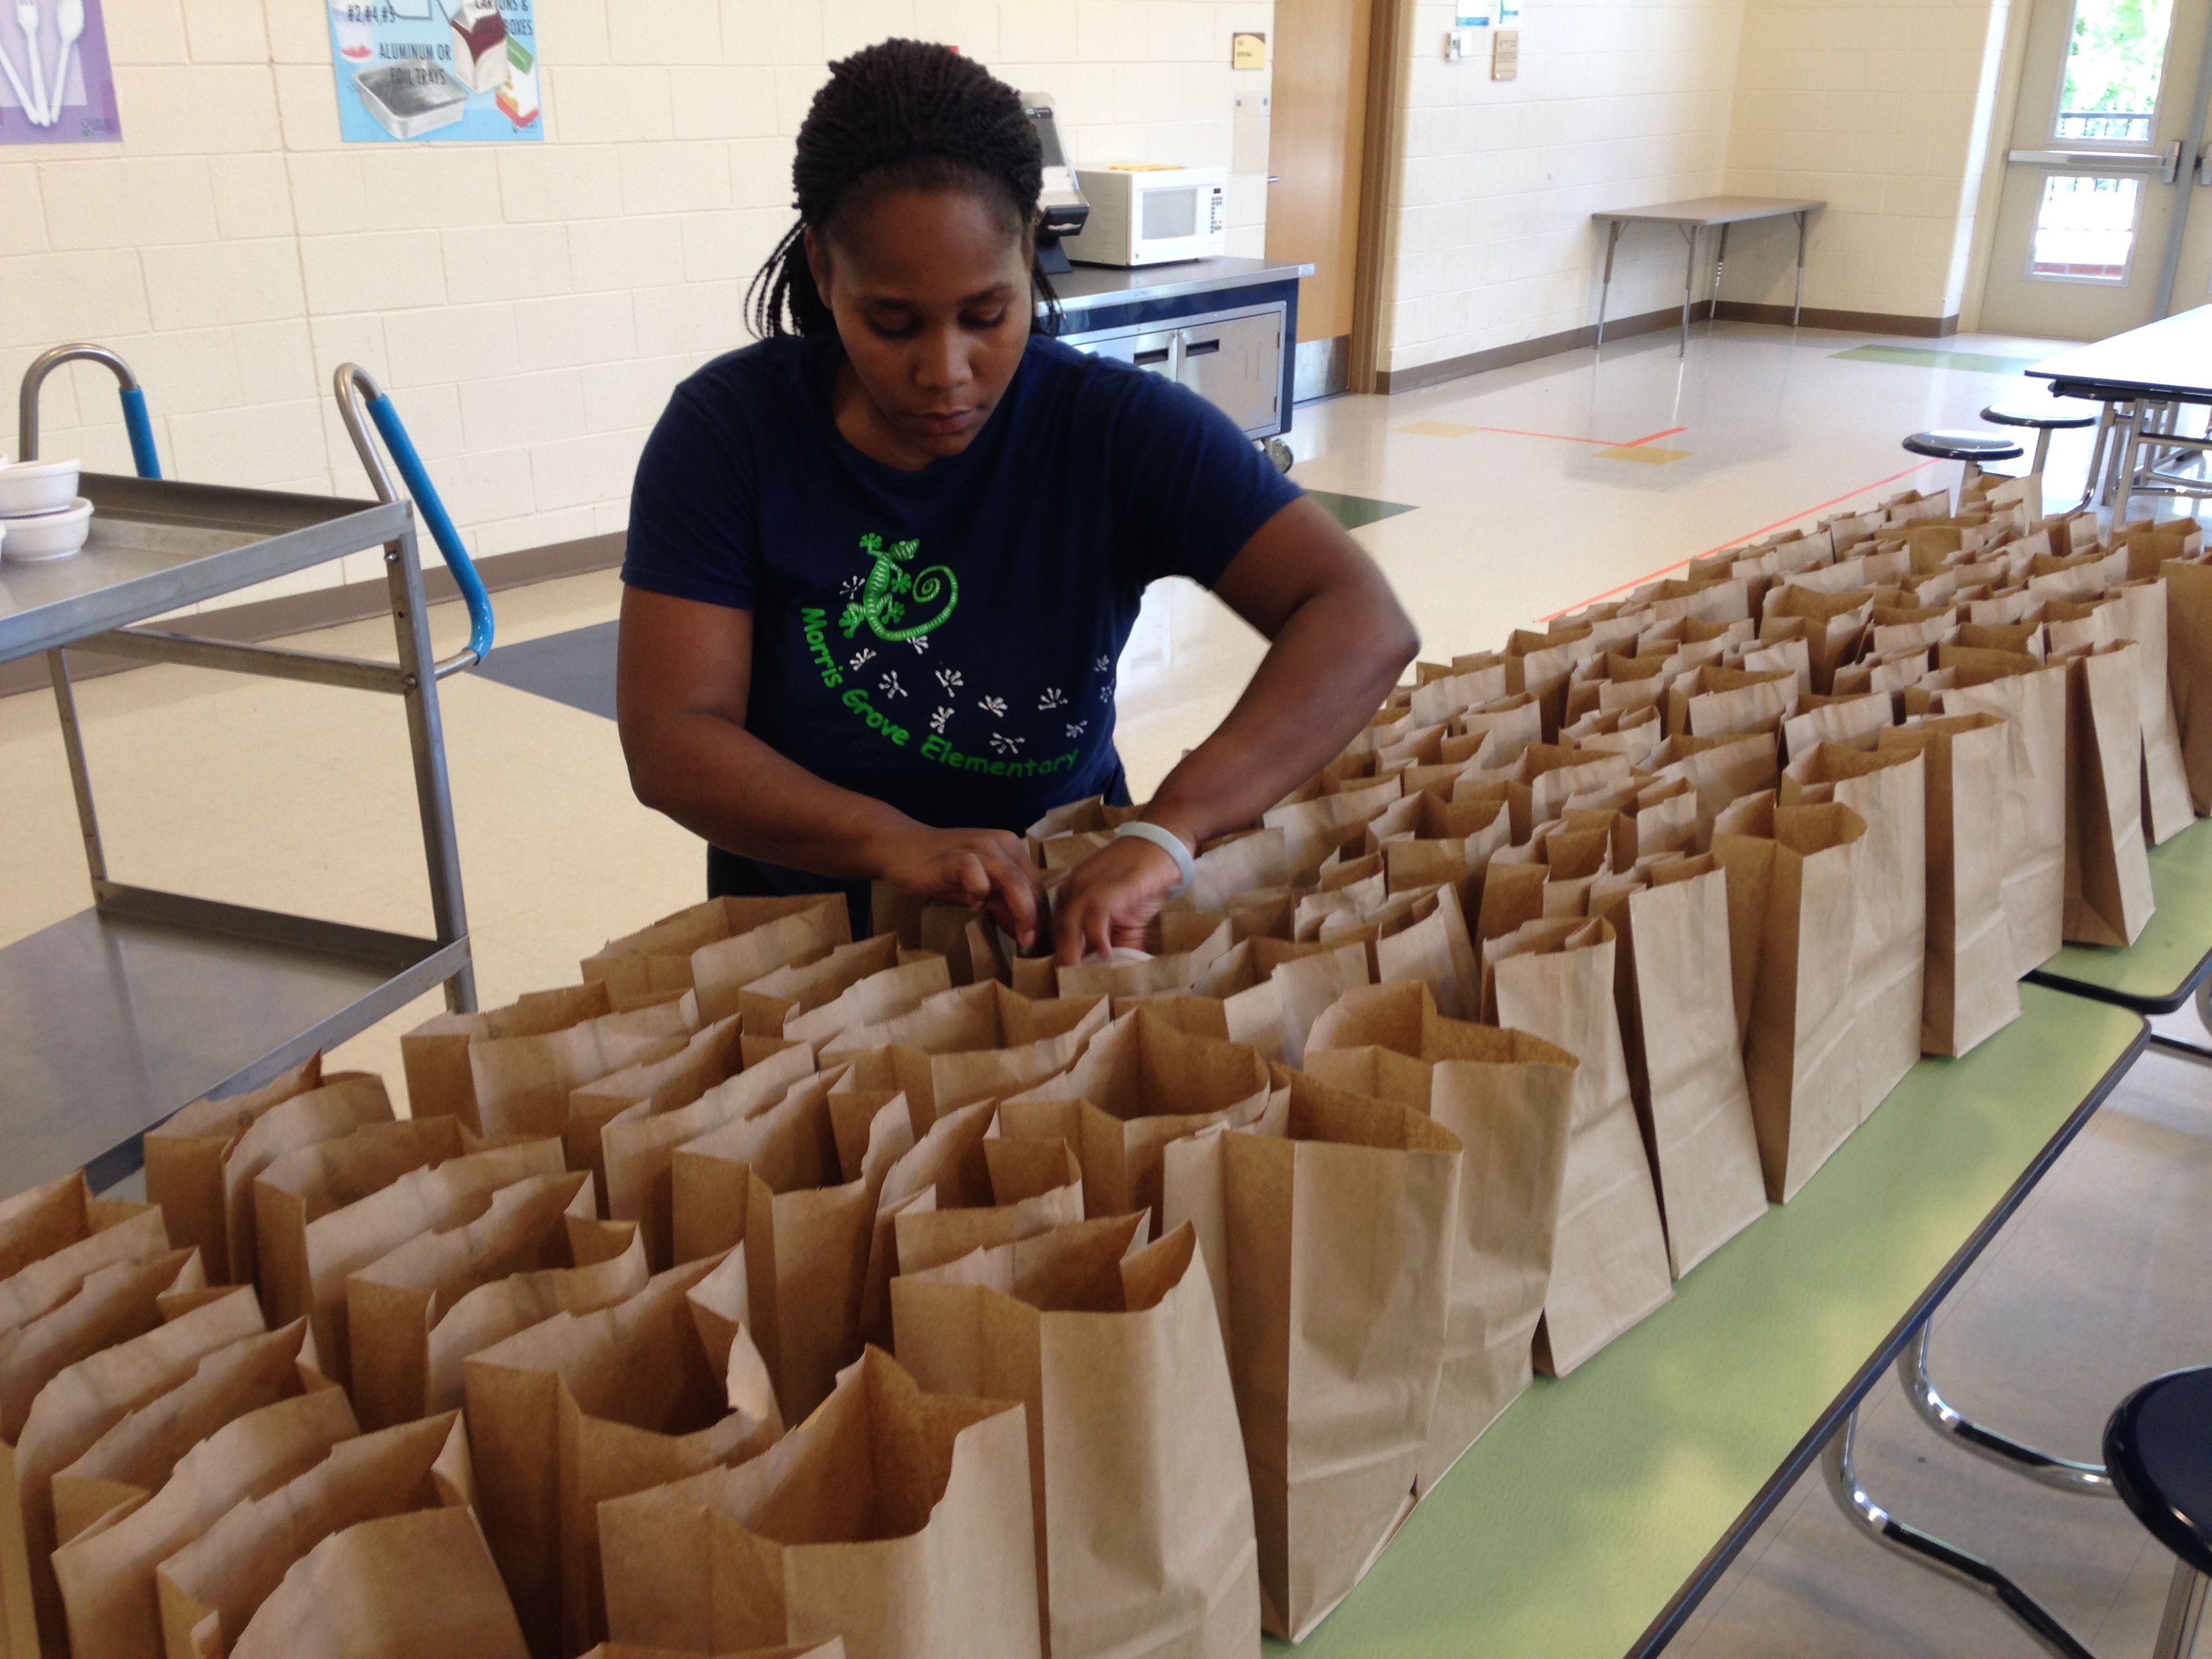 CHCCS Providing Lunches While Schools Closed for Teacher Rally